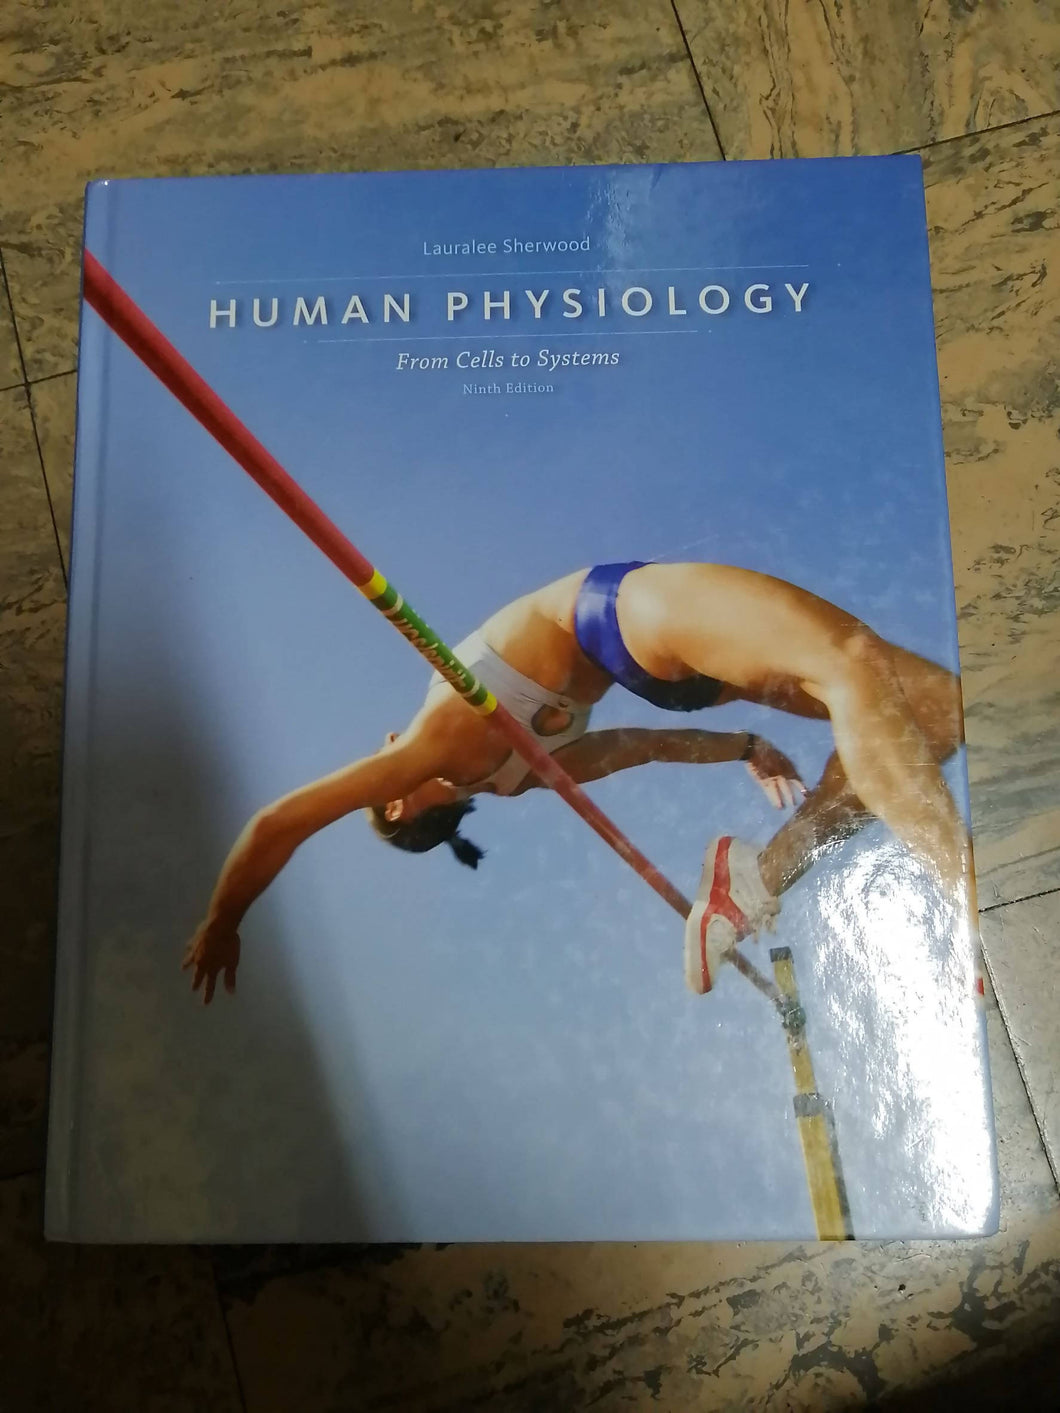 Human Physiology: From Cells to Systems 9th ed. (Hardcover)